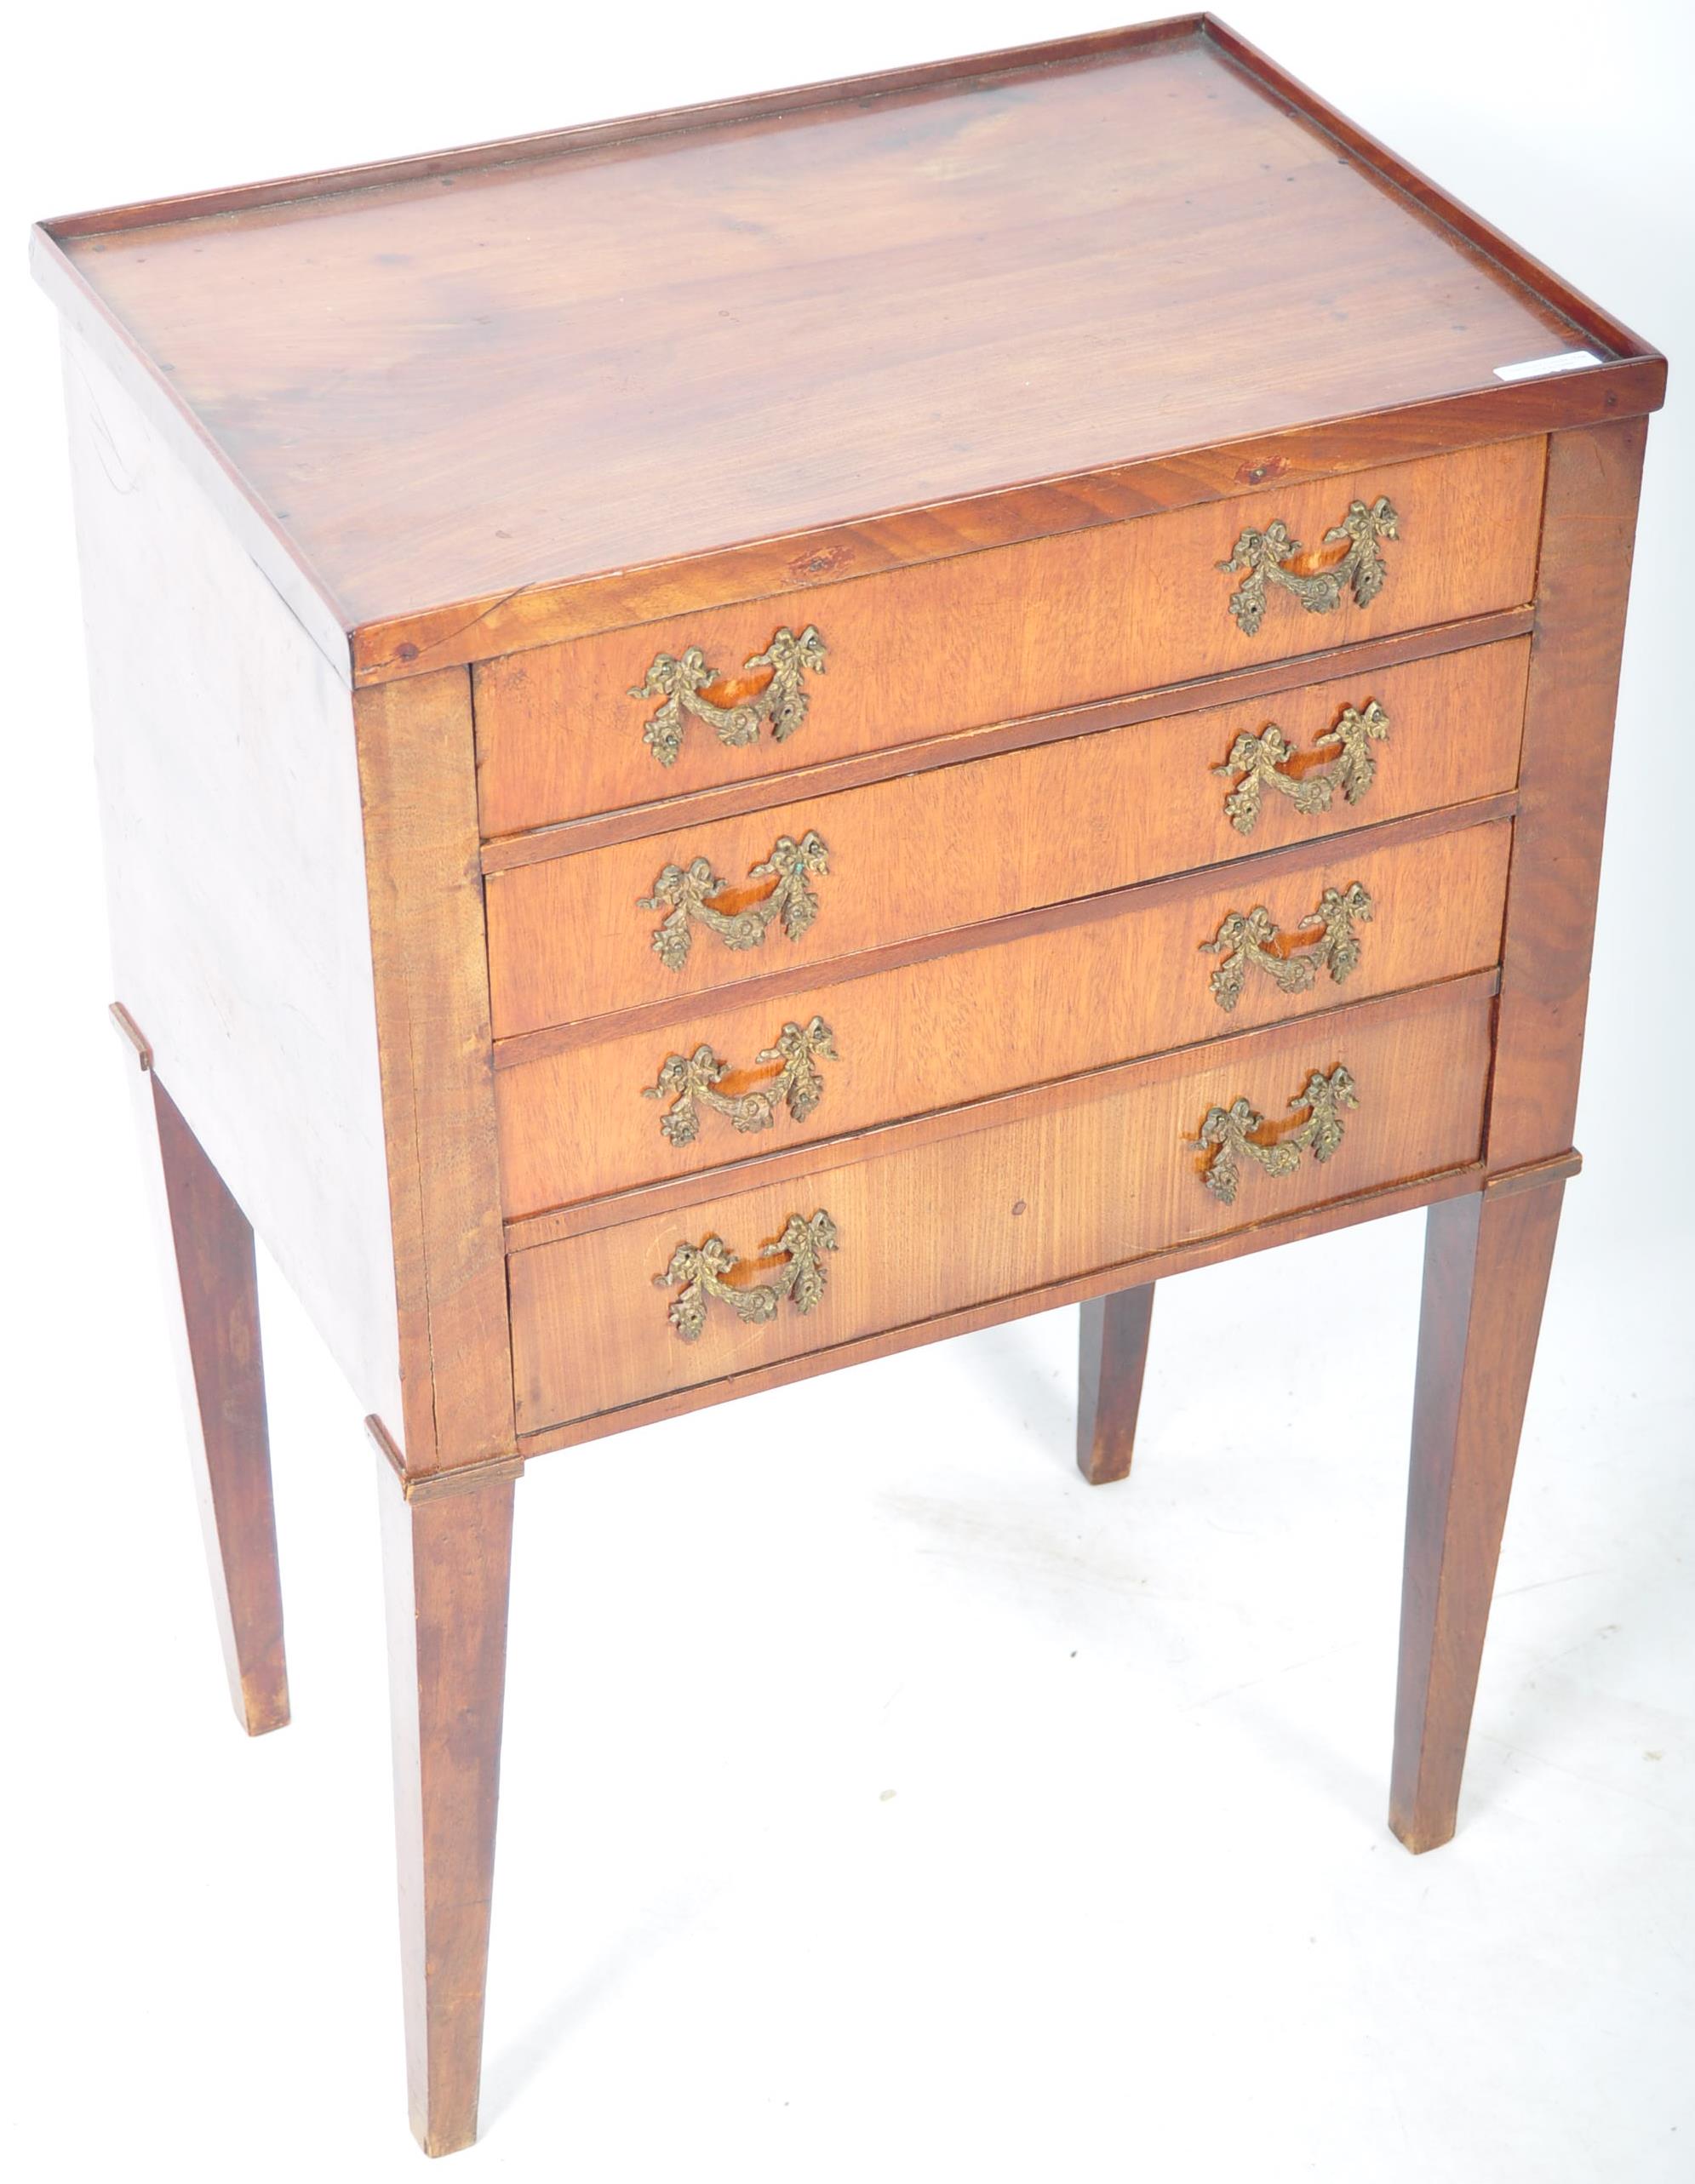 19TH CENTURY ANTIQUE CHEST OF DRAWERS OF GOOD SMALL PROPORTIONS - Image 2 of 5